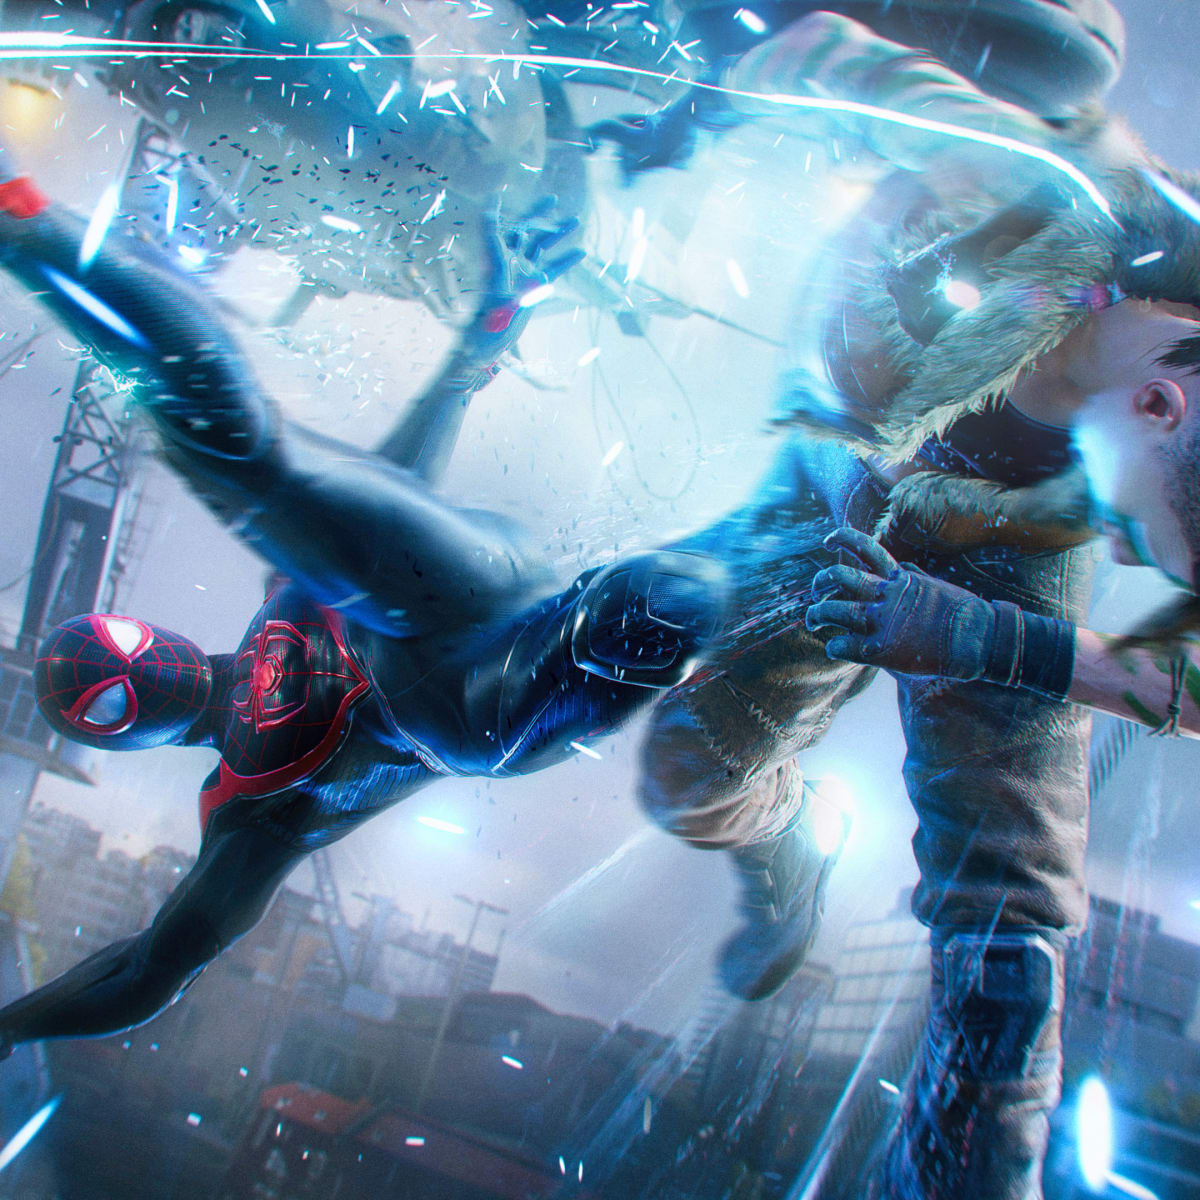 Spider-Man 2 Fastest-Selling Game In PlayStation History